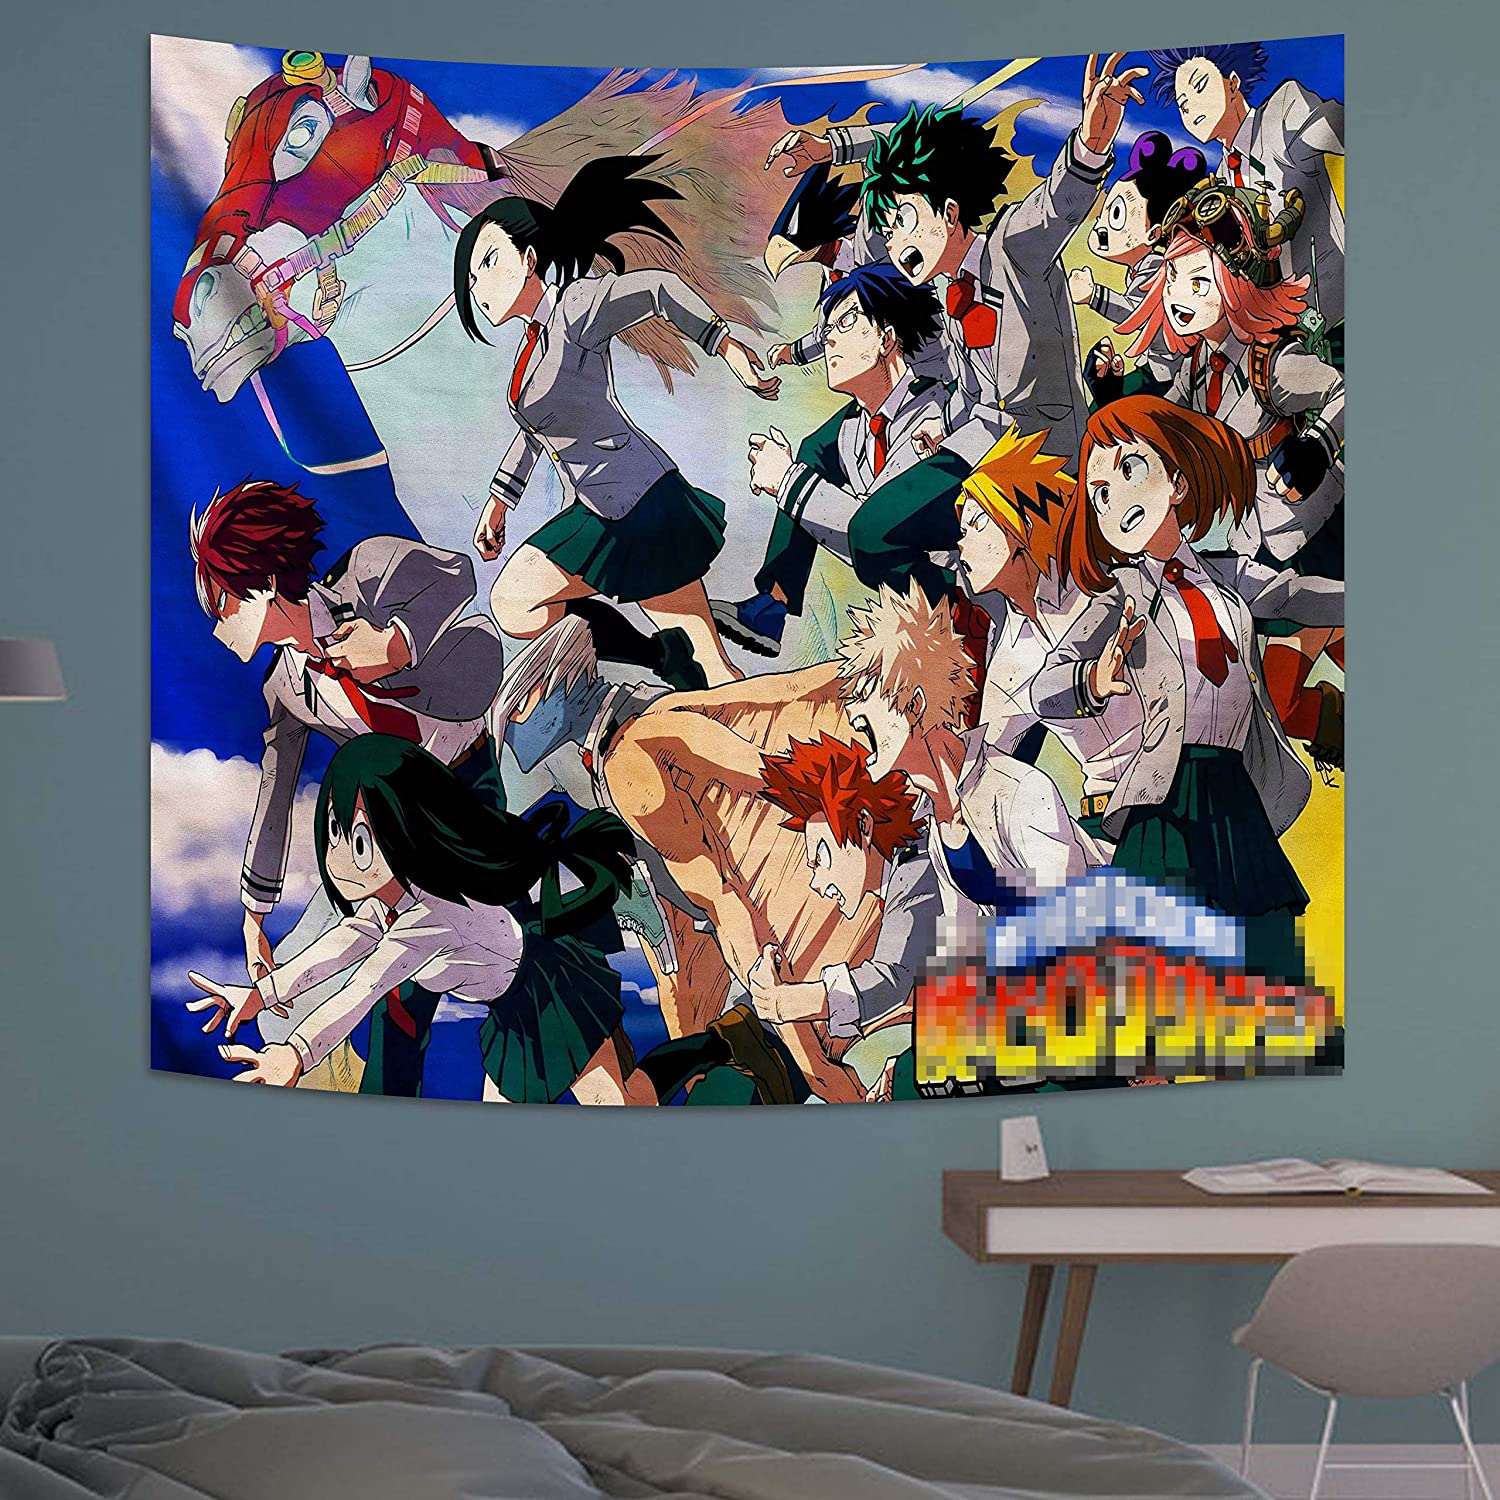  Anime Made Pants Erotic Big Tits Tapestry Wall Hanging  Interior Multi-functional Wall Hanging Fabric Wall Hanging Stylish Tapestry  Tapestry Anime Tapestry Large Tapestry Wall Hanging Stylish Room Window Top  Decoration Individuality